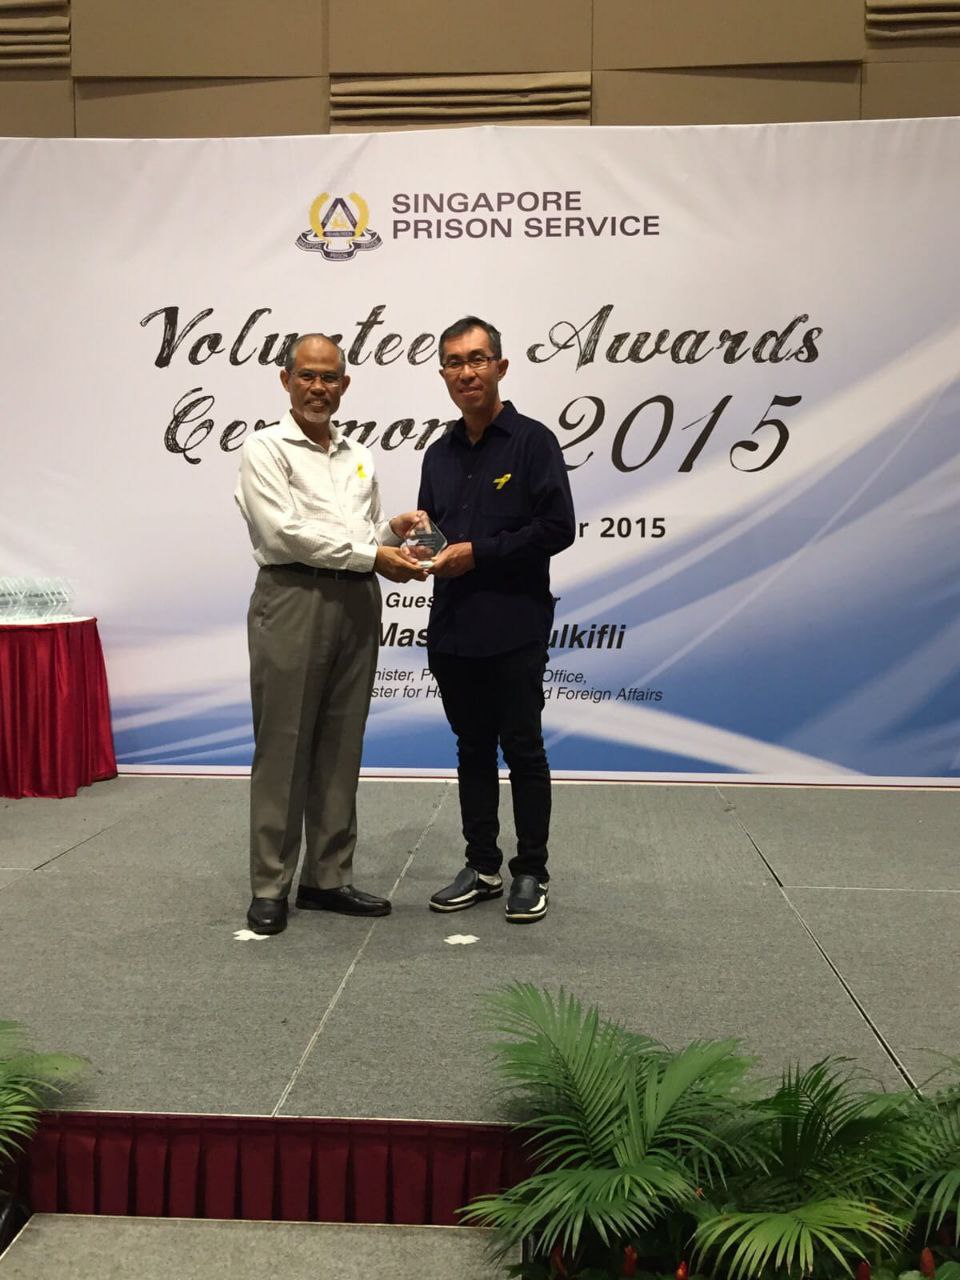 Teoh receiving an award from Mr Masagos Zulkifli for his long-term work in prison.